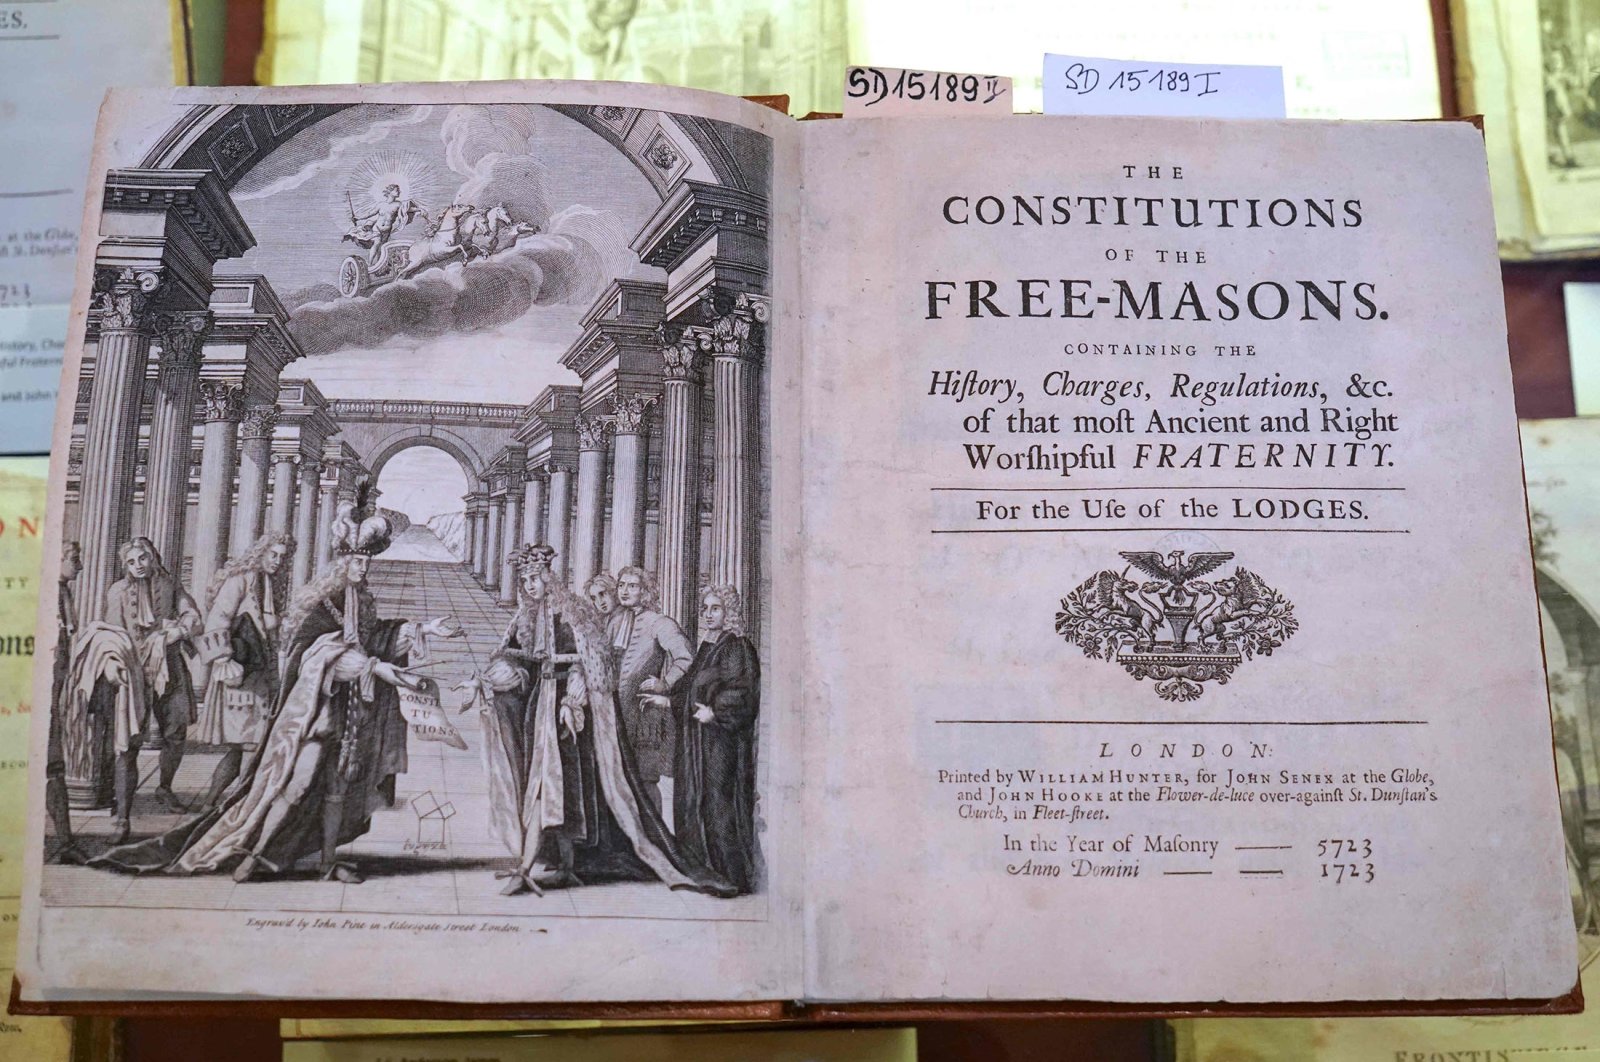 A copy of the work &quot;The Constitutions of the Free-Masons,&quot; the first Masonic constitution written by James Anderson published in 1723, on display at the Poznan University Library in Poznan, Poland, Dec. 22, 2021. (AFP Photo)